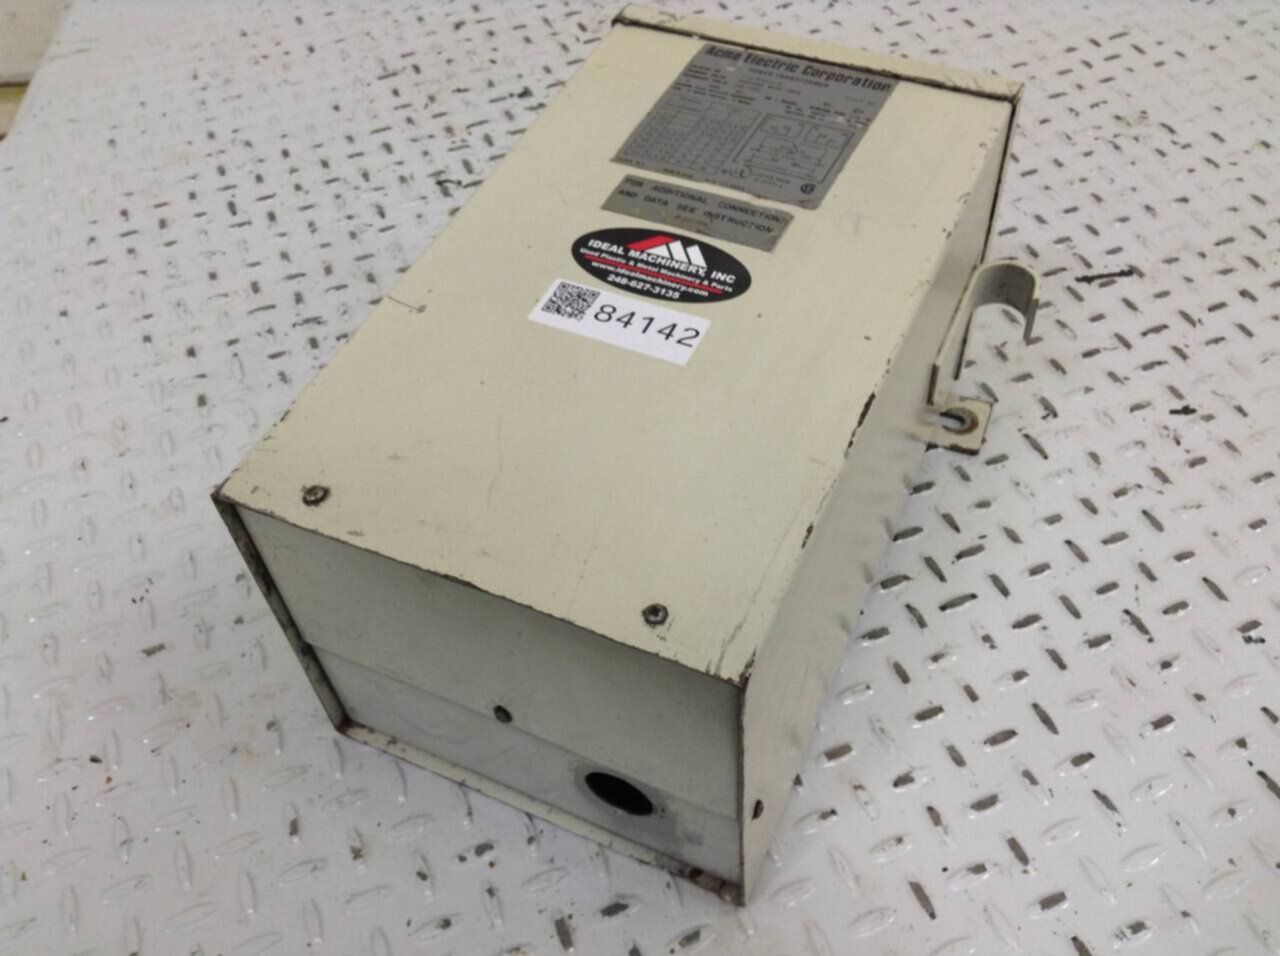 Details about   GRAND TRANSFORMERS 4.5 kVA Transformer 470144-3 Used #76527 